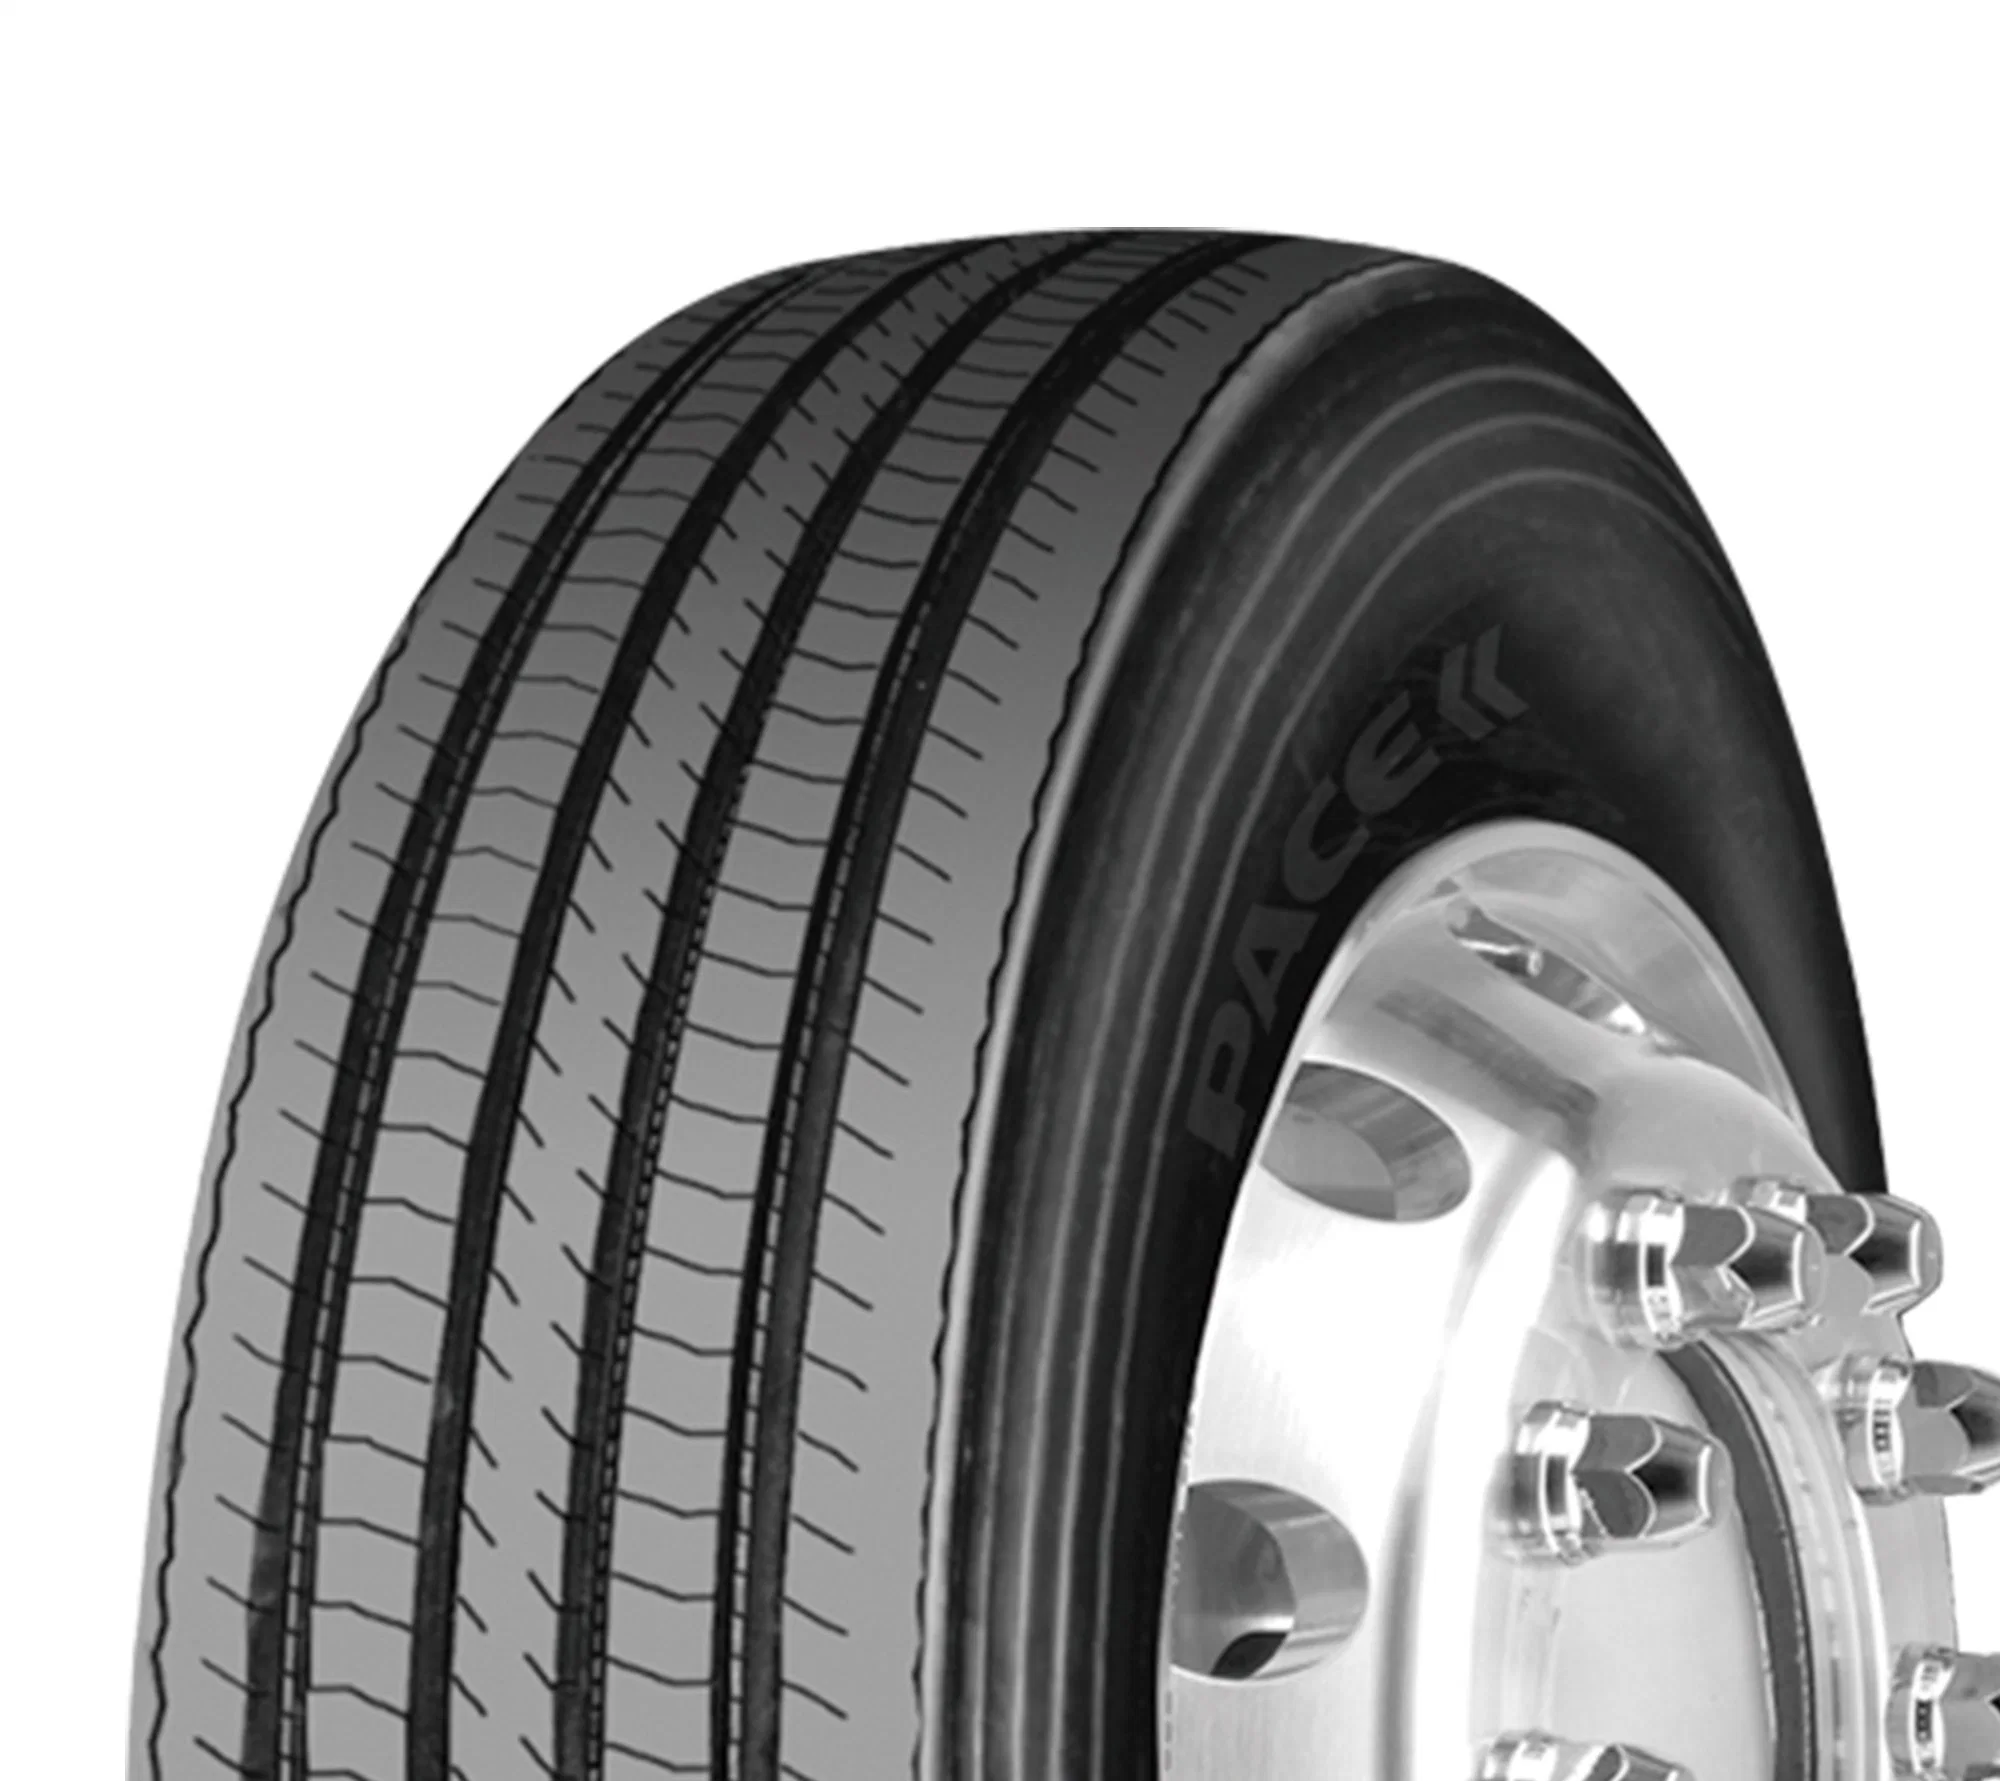 Hot Sale TBR Tires, Truck Car Tires, Radial Truck and Bus Tire, High Quality TBR Tire